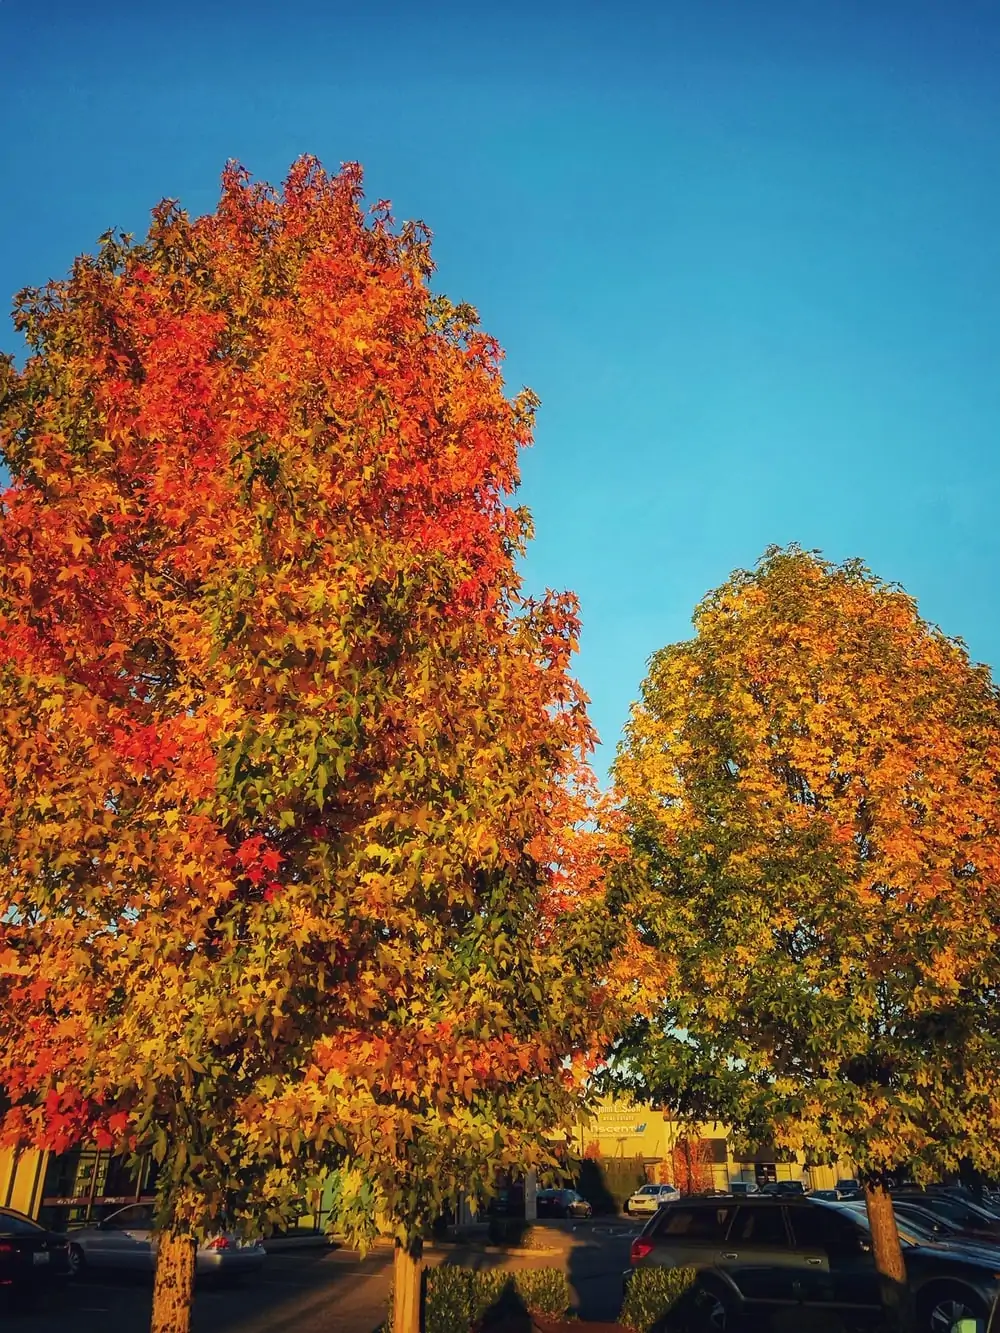 Places to view Autumn Leaves in the NW